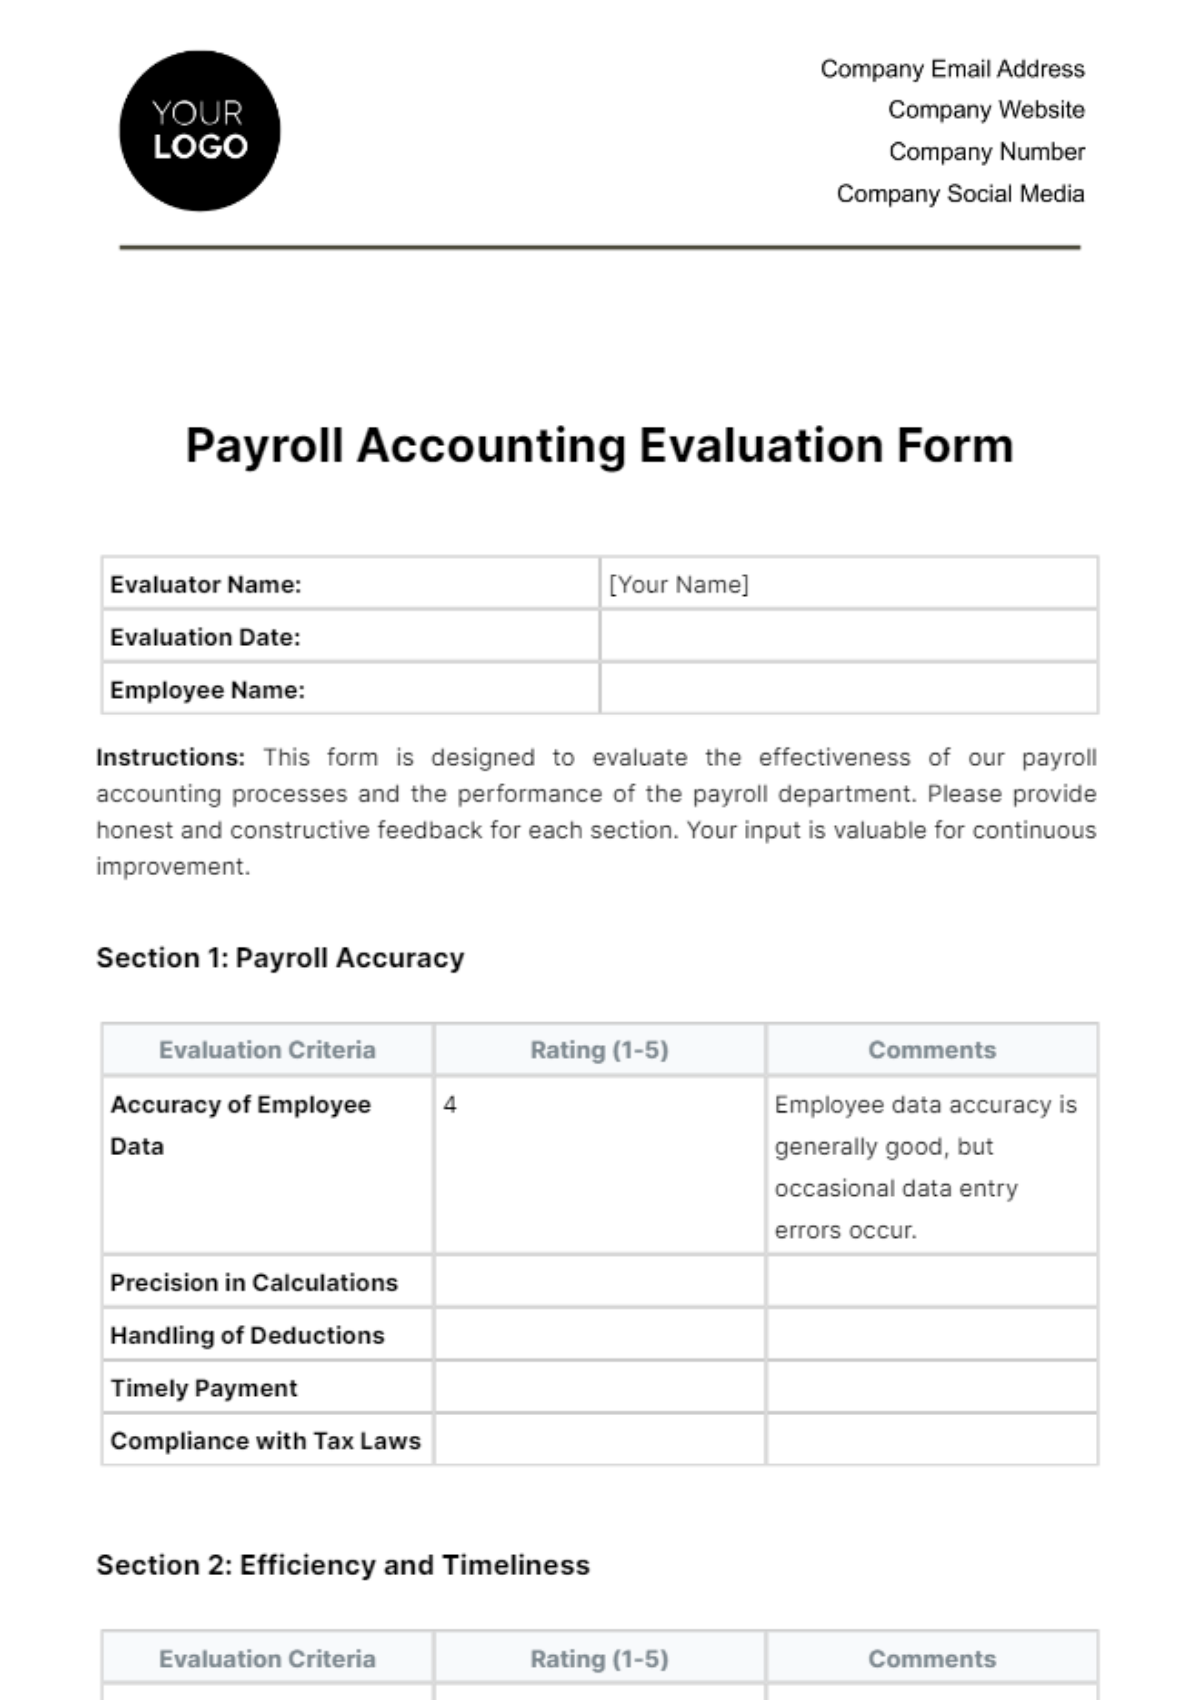 Payroll Accounting Evaluation Form Template